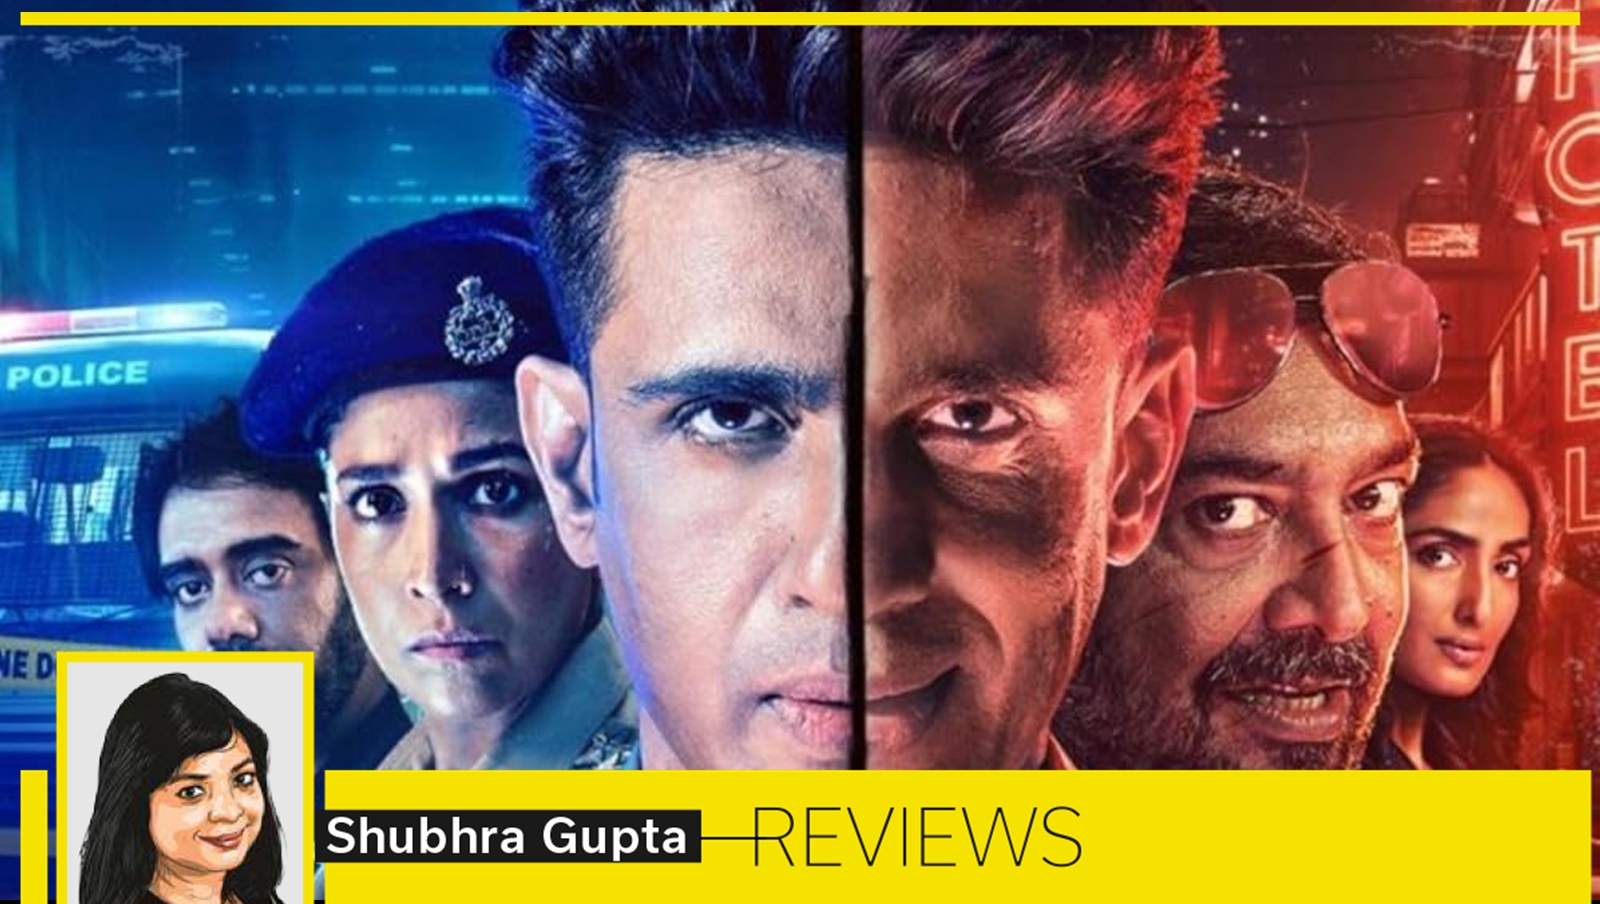 Review of “Bad Cop”: The series by Gulshan Devaiah and Anurag Kashyap is completely “filmed” | News about web series